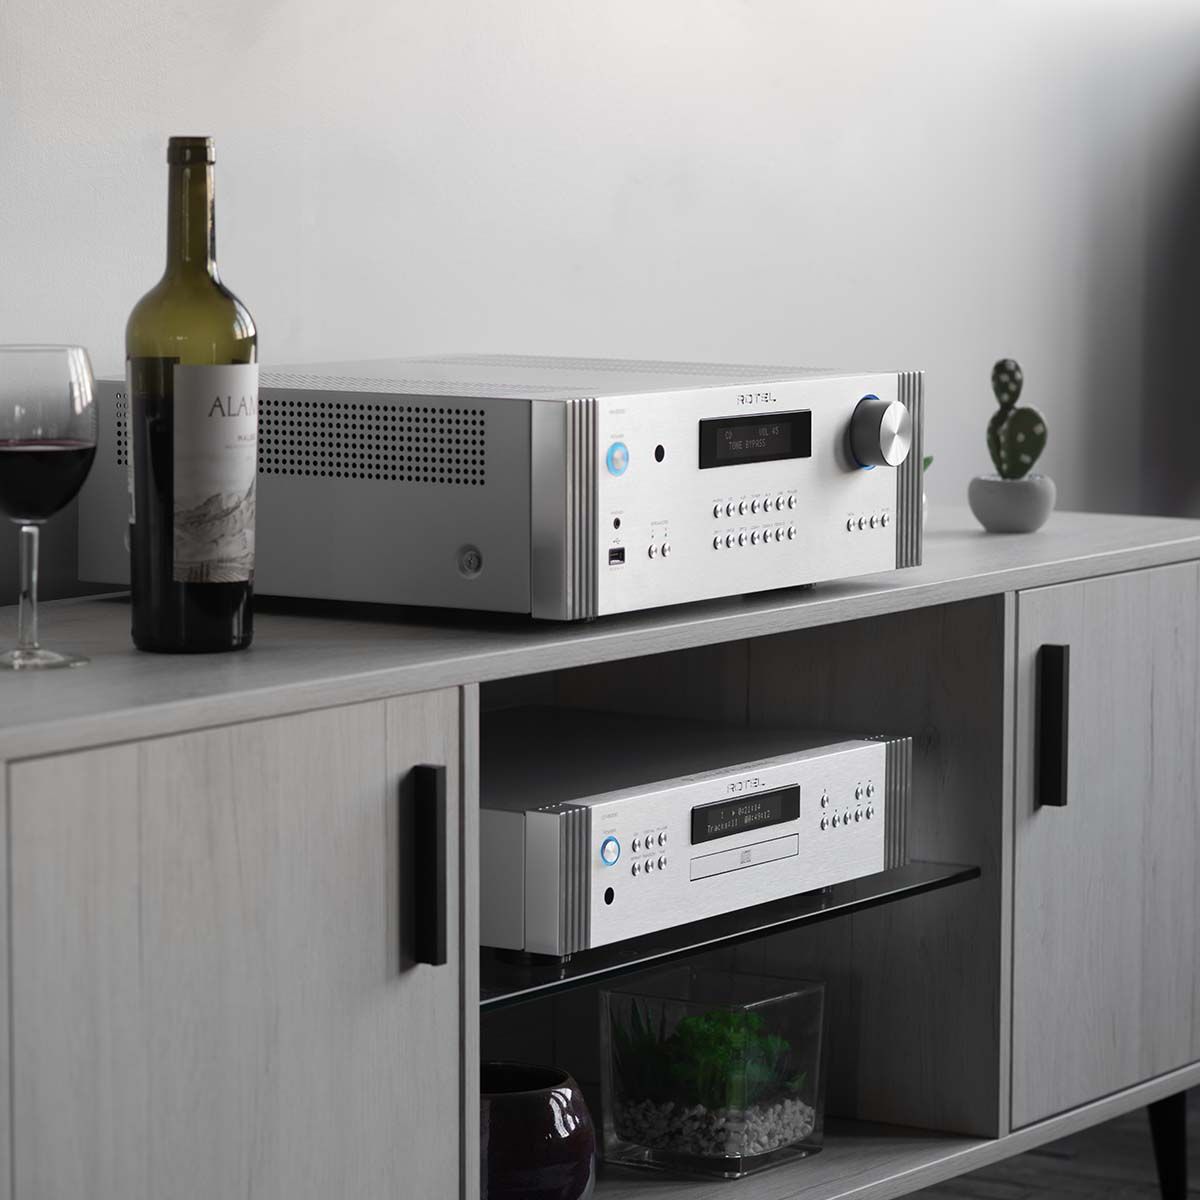 Rotel RA-6000 Integrated Amplifier - Silver - angled front view on media cabinet with matching DT-6000 DAC/CD transport